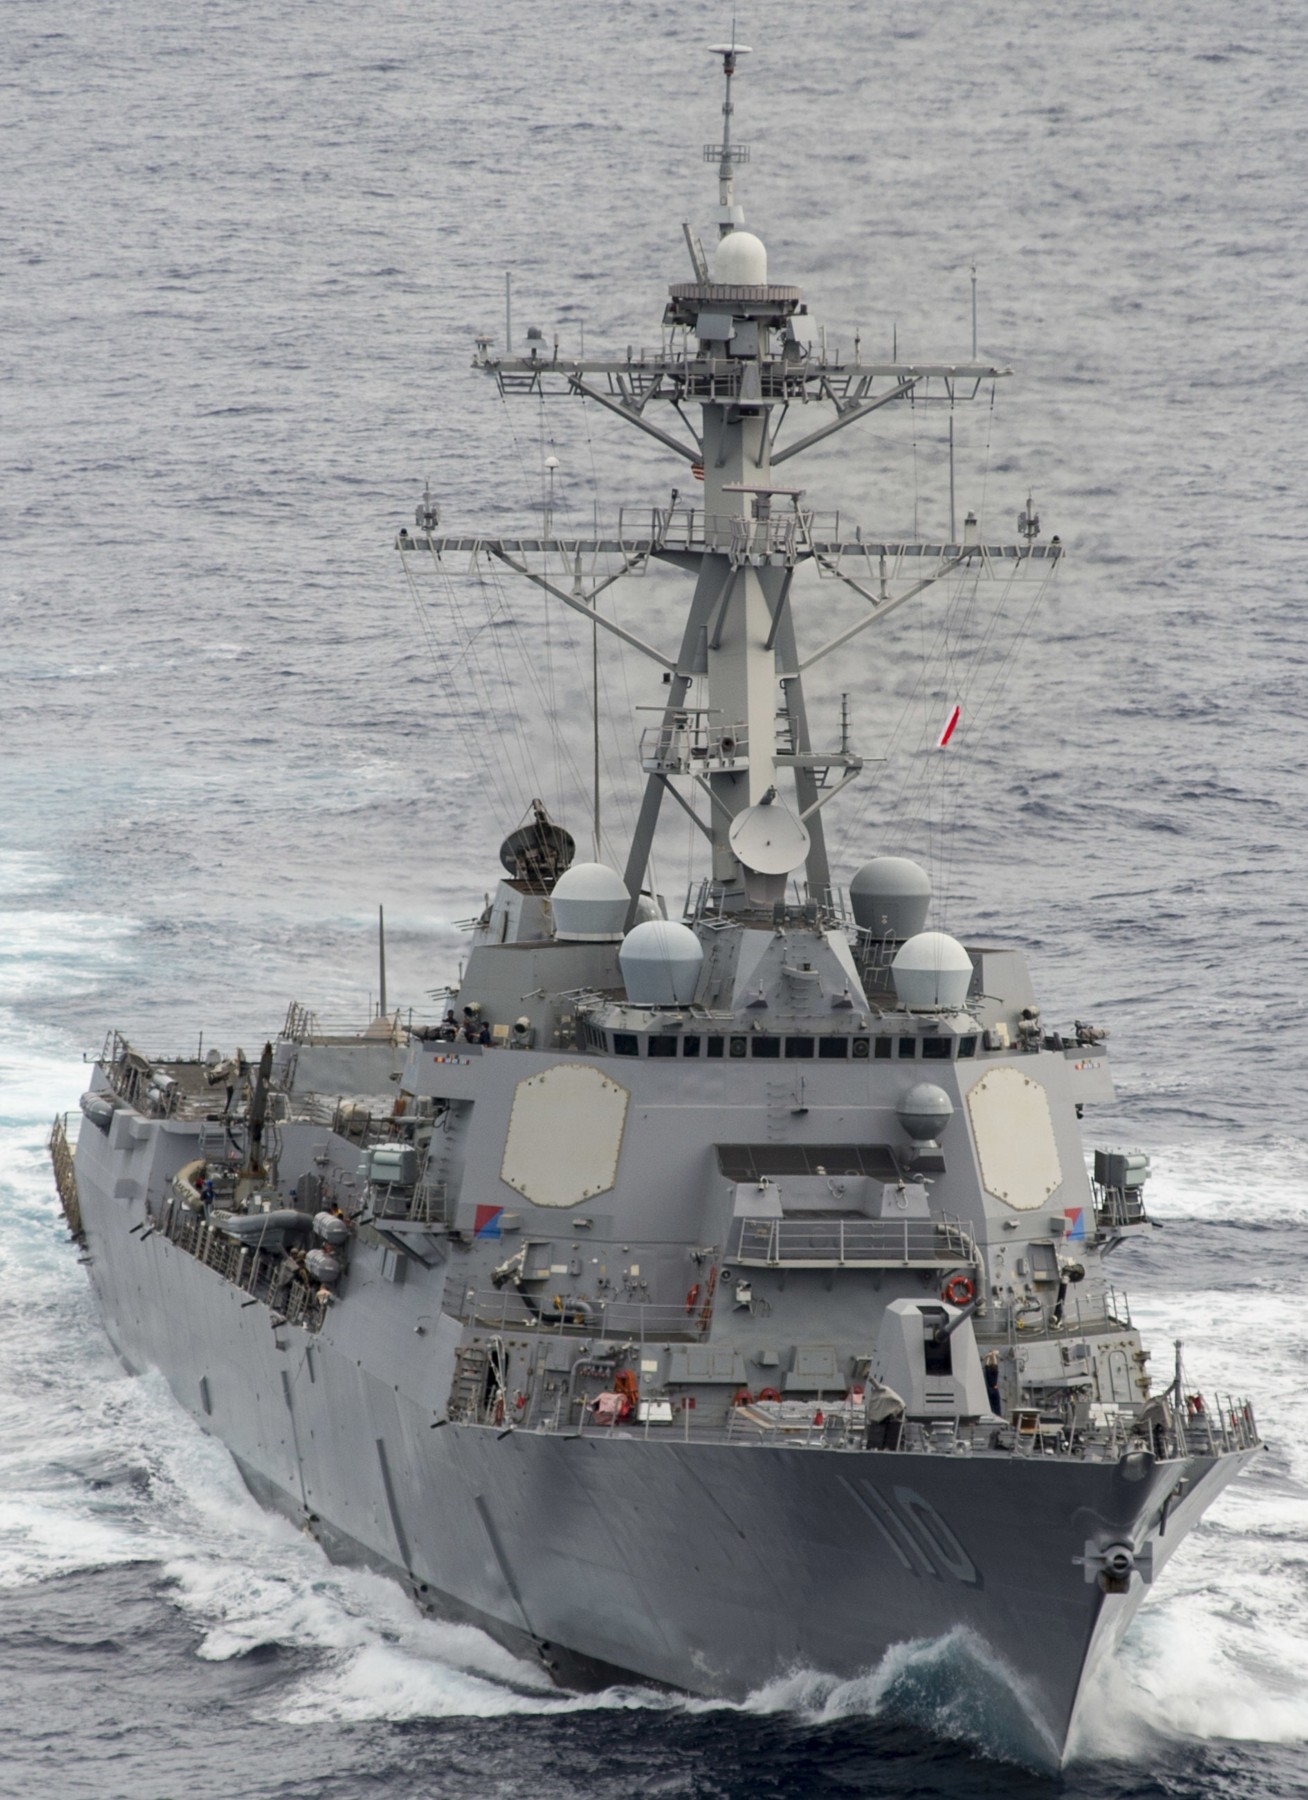 ddg-110 uss william p. lawrence arleigh burke class guided missile destroyer aegis us navy 17